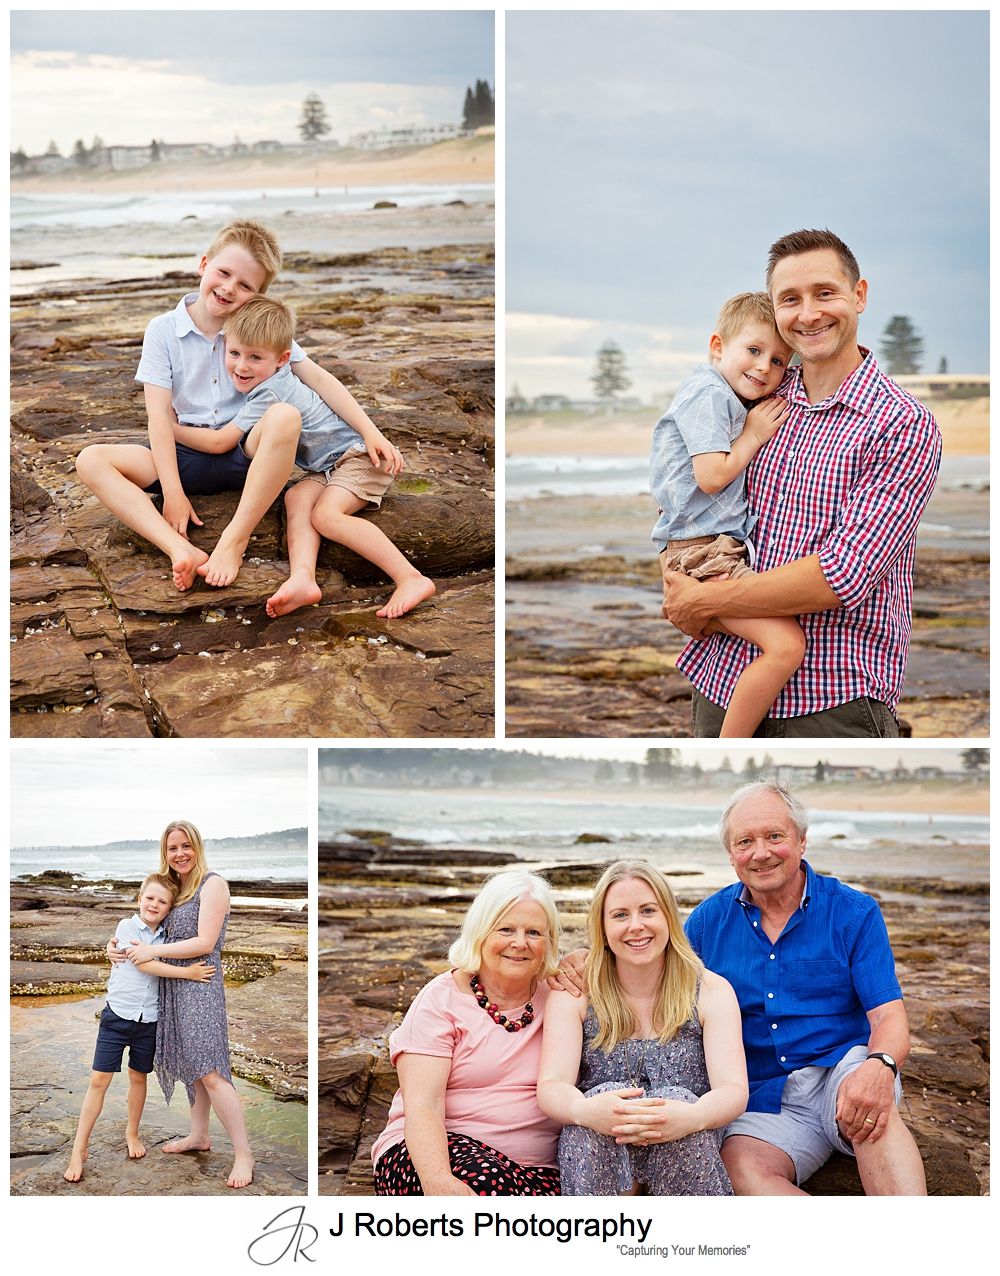 Sydney Northern Beaches Photography of Extended Family at North Narrabeen Rockpool